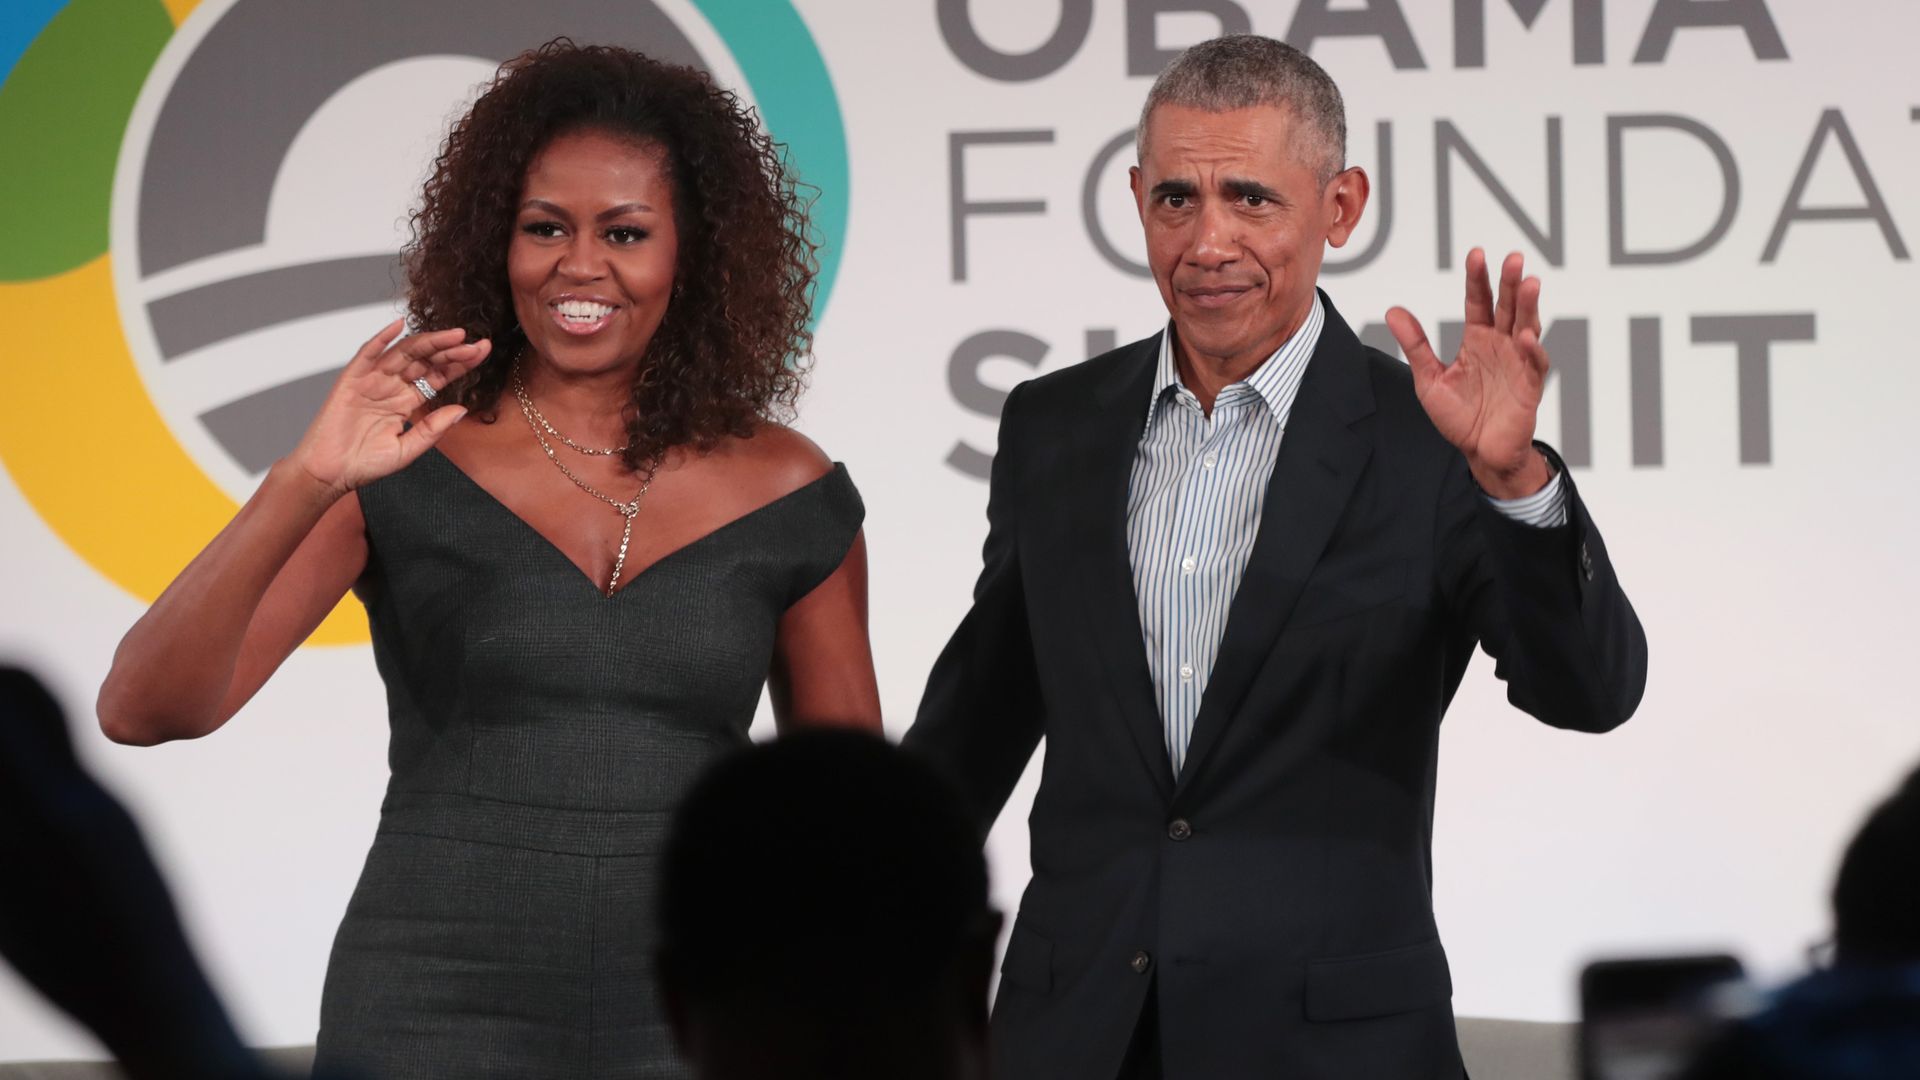  Former U.S. President Barack Obama and his wife Michelle close the Obama Foundation Summit together 